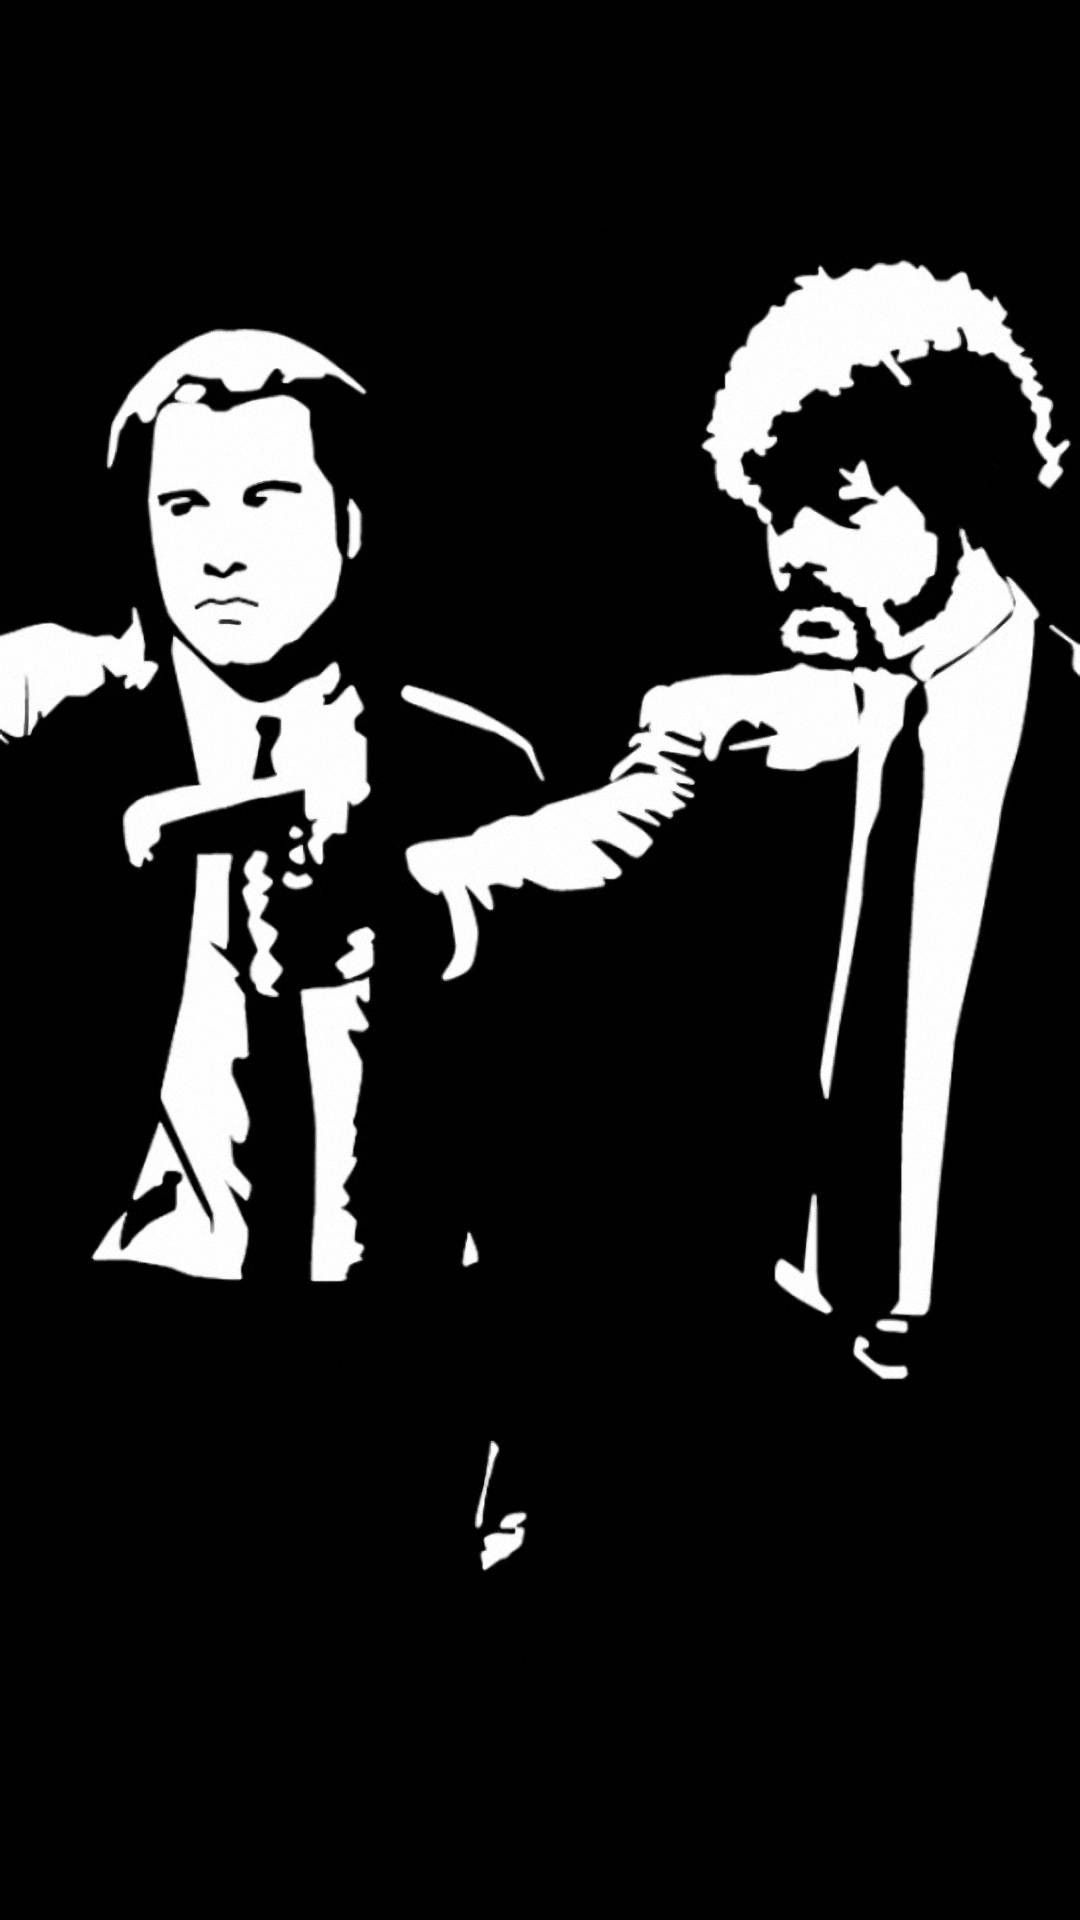 Pulp Fiction Iphone Wallpapers